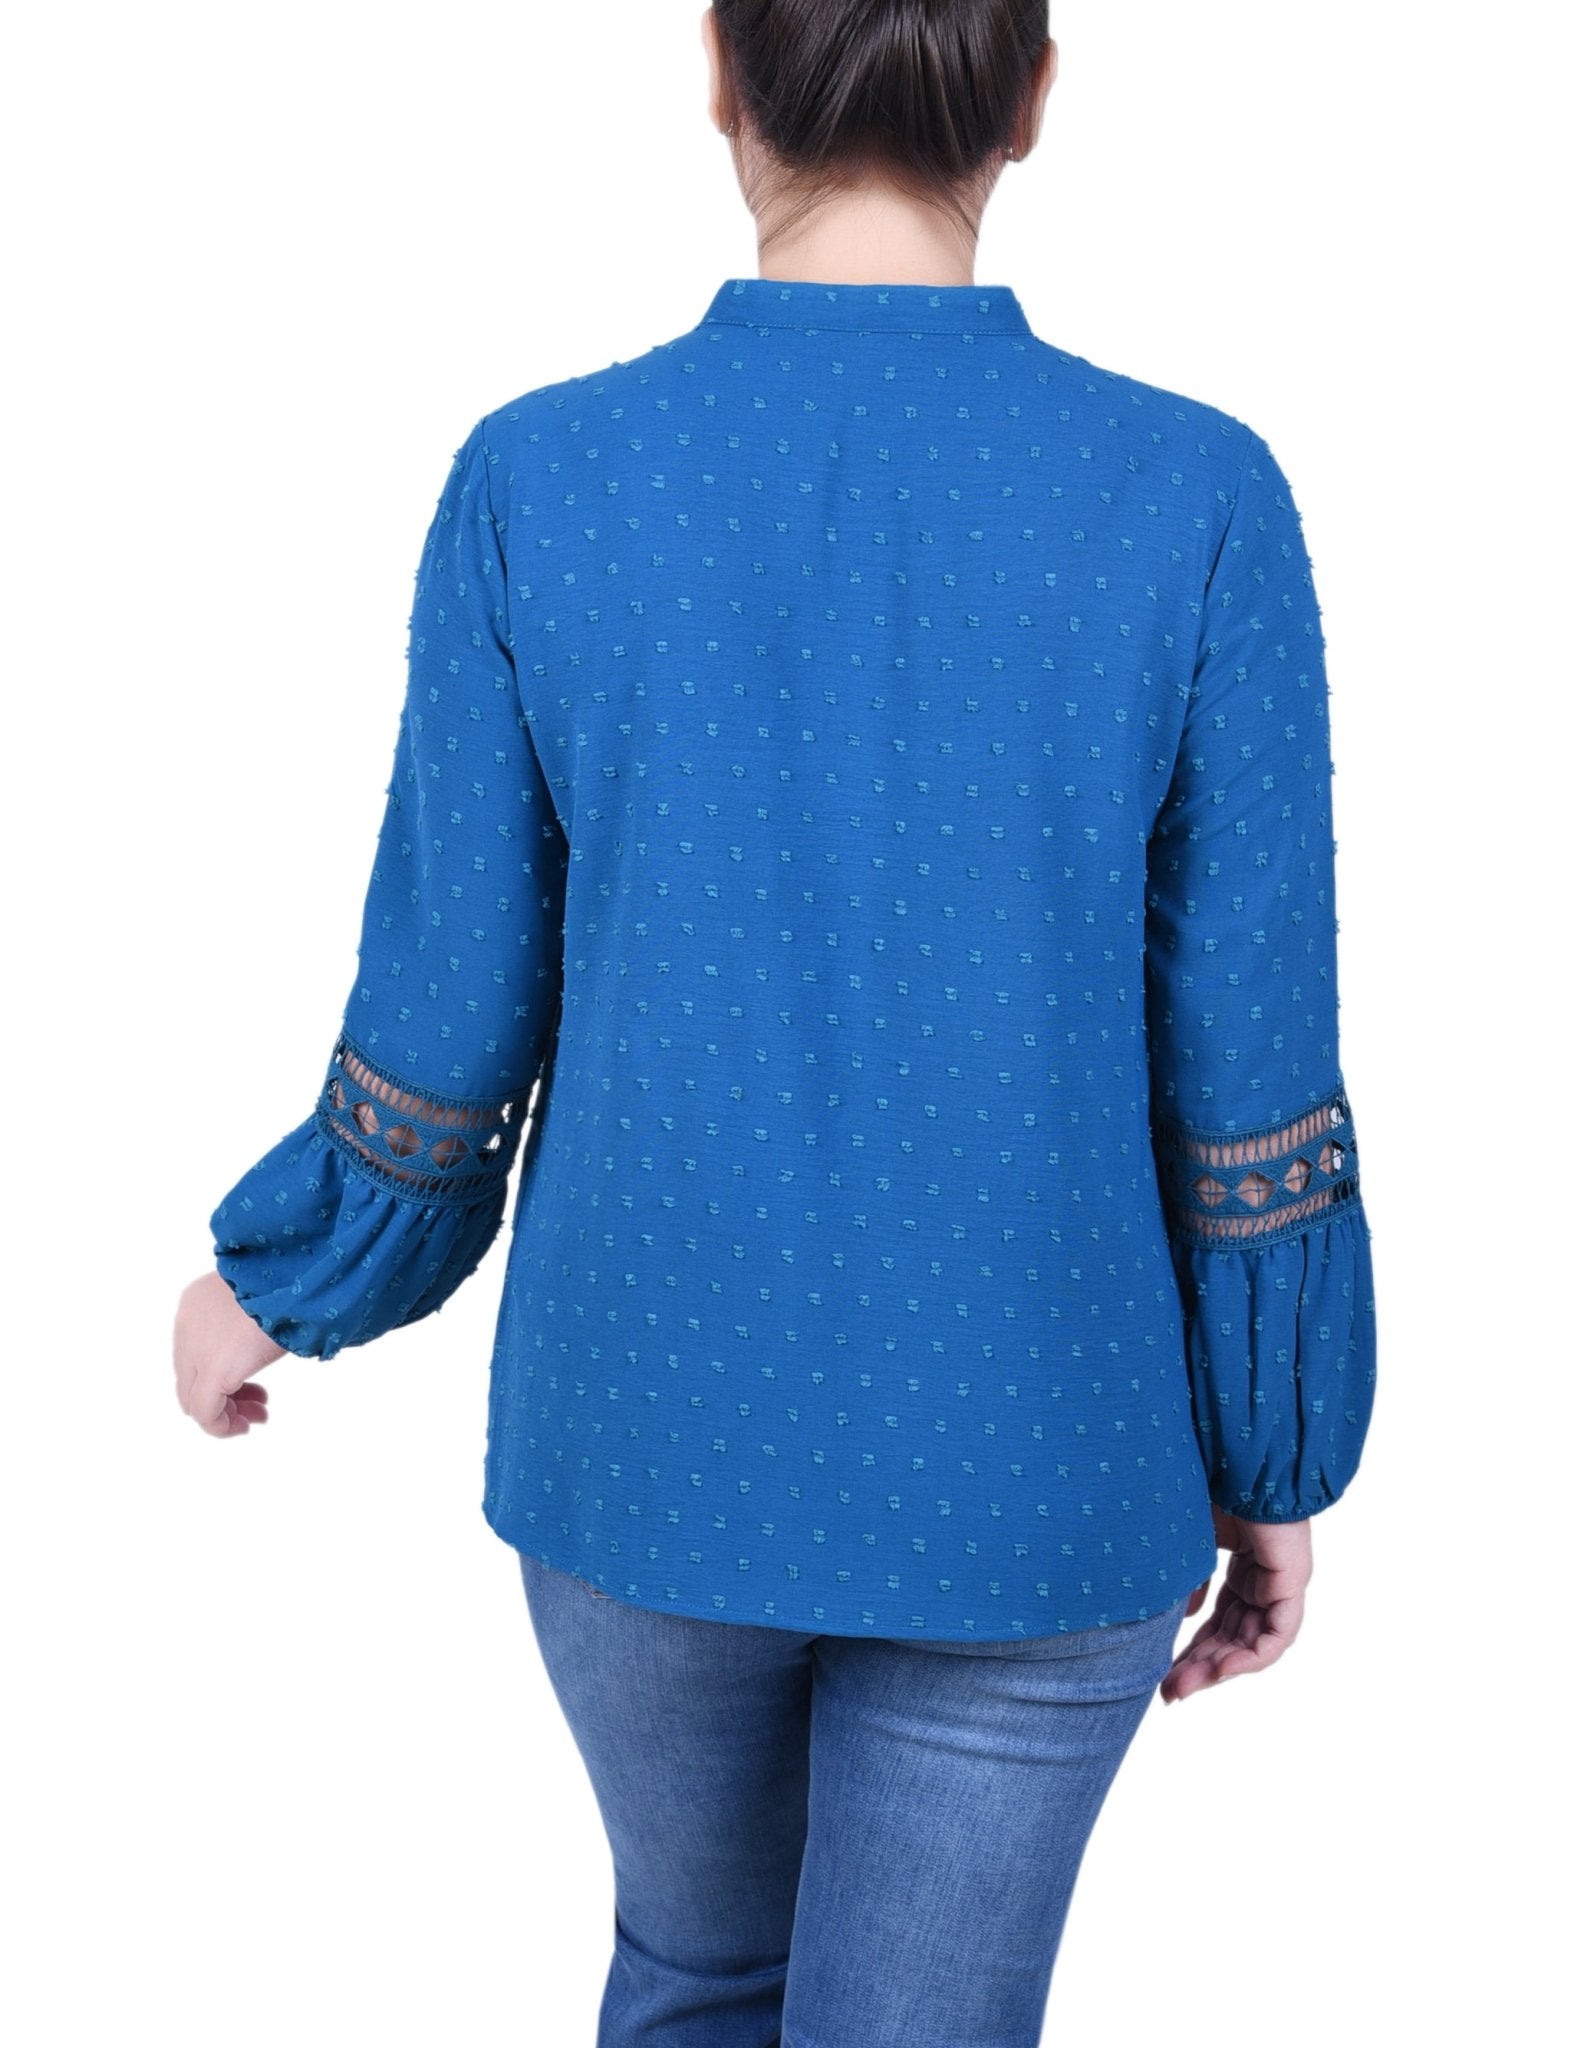 NY Collection Long Sleeve Blouse With Crochet Trim - Petite - DressbarnShirts & Blouses